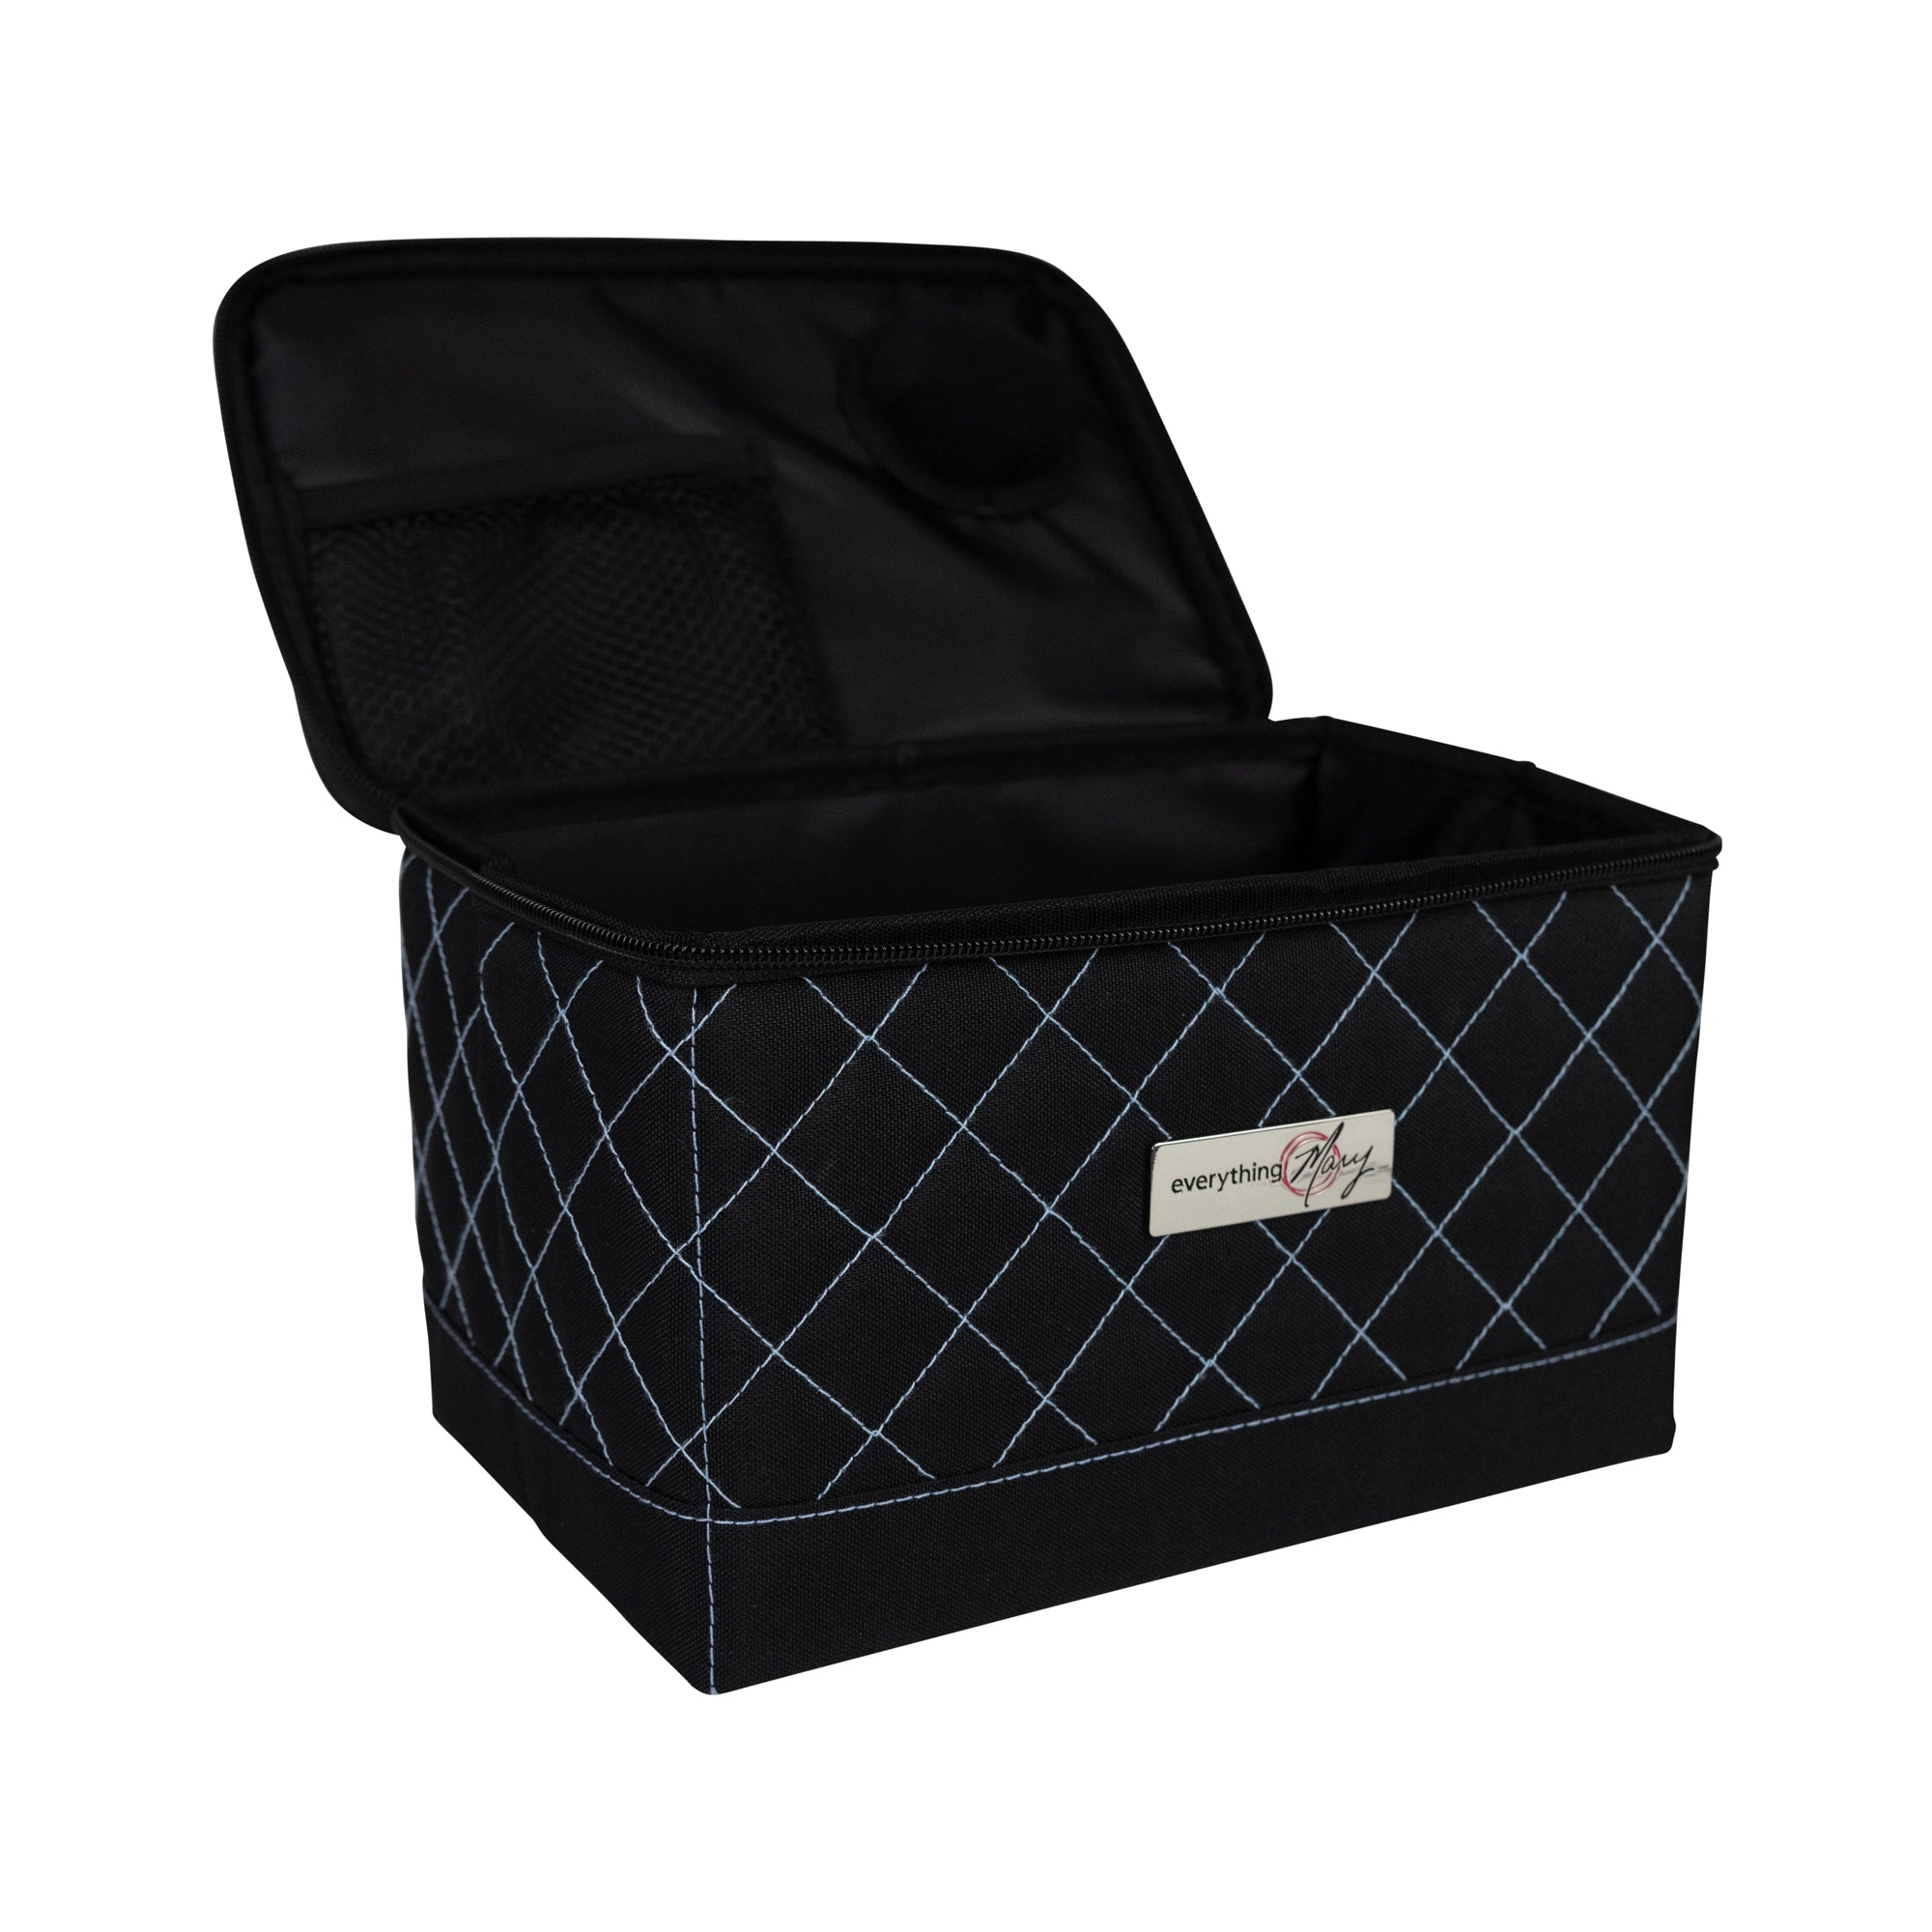 Collapsible Sewing Kit Organizer Box, Black & Blue Quilted - Everything Mary